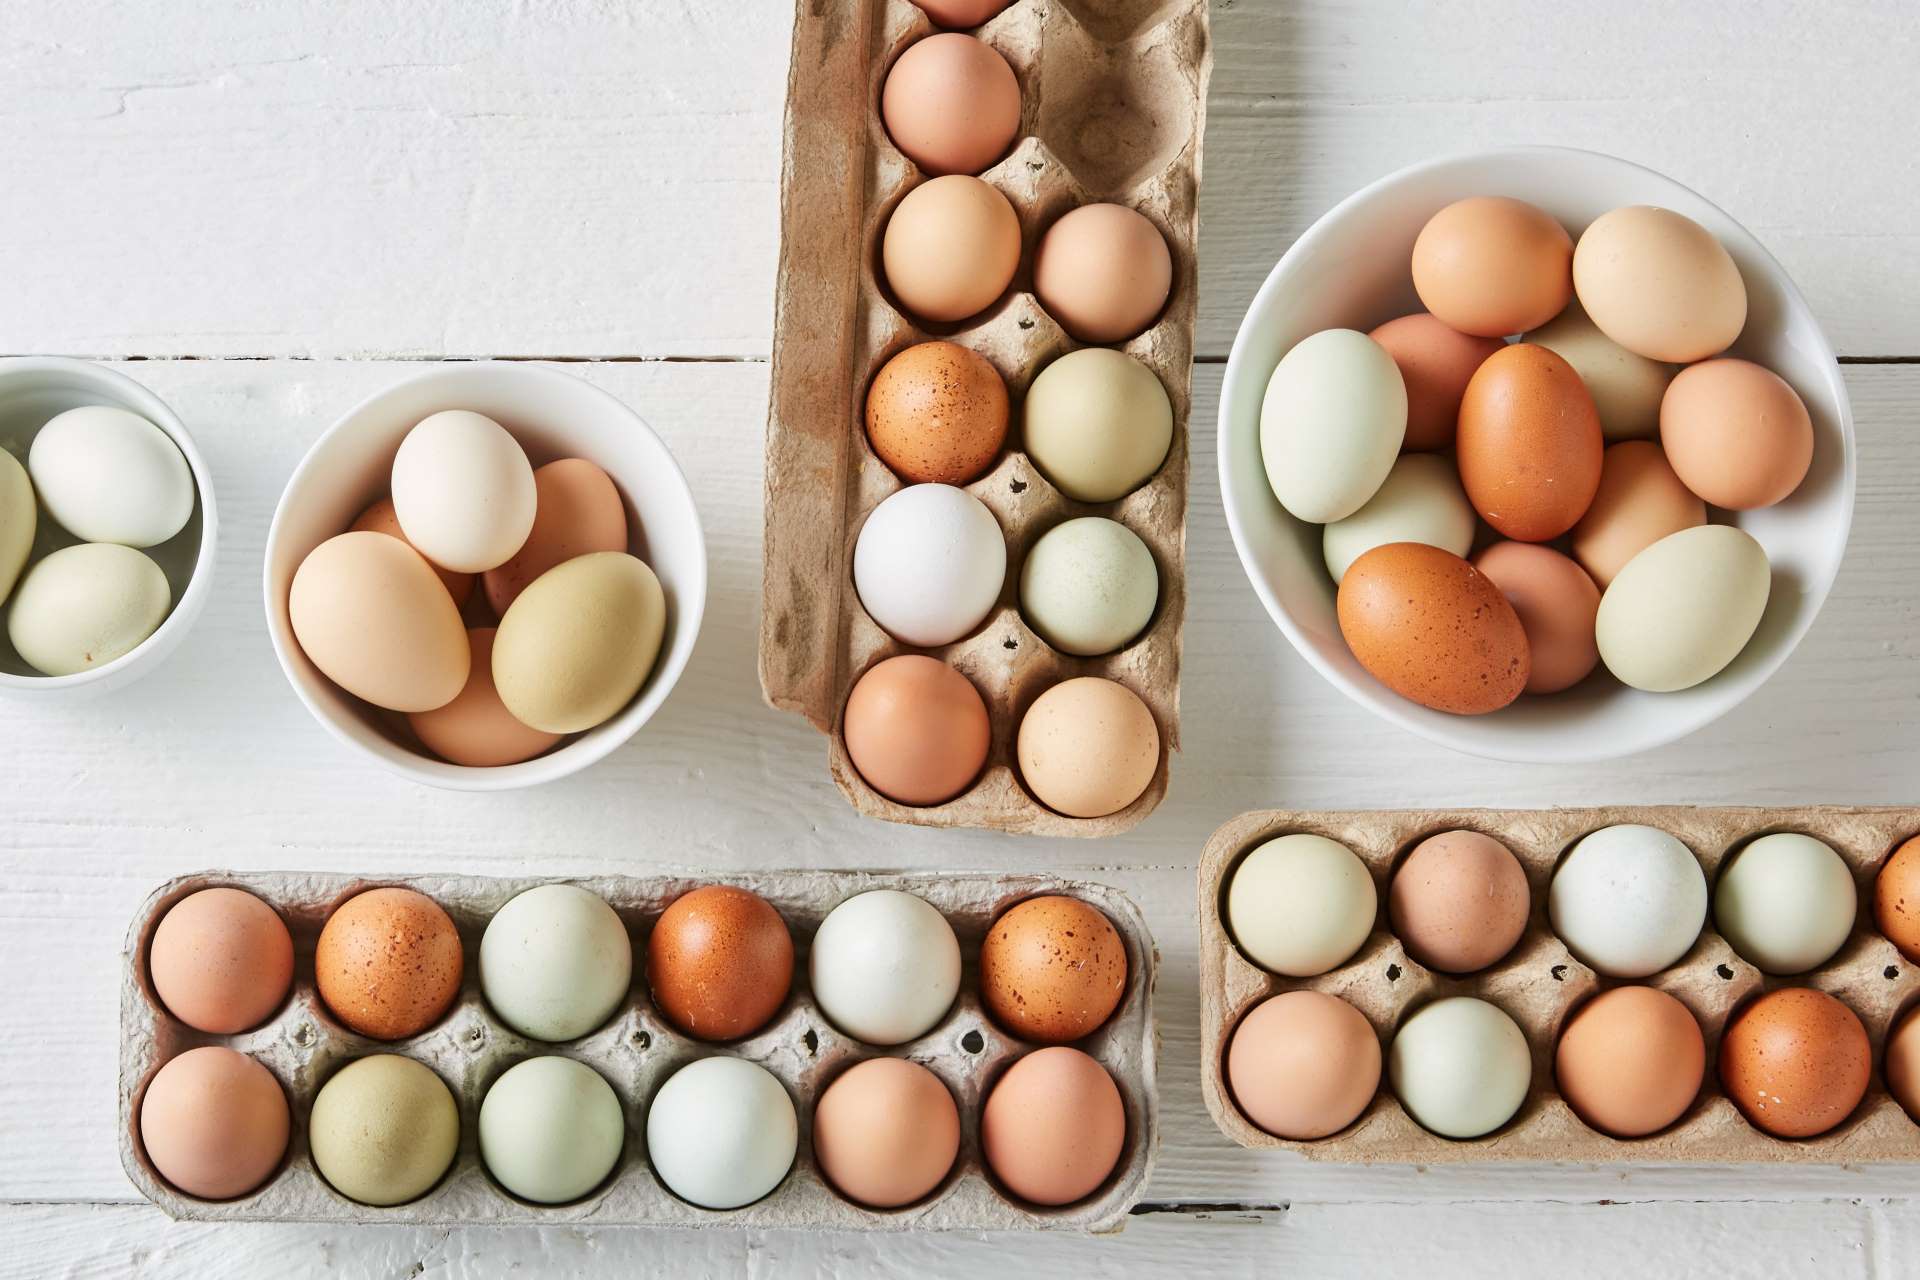 PASTURE-RAISED, FREE RANGE, CAGE FREE: A GUIDE TO BUYING EGGS